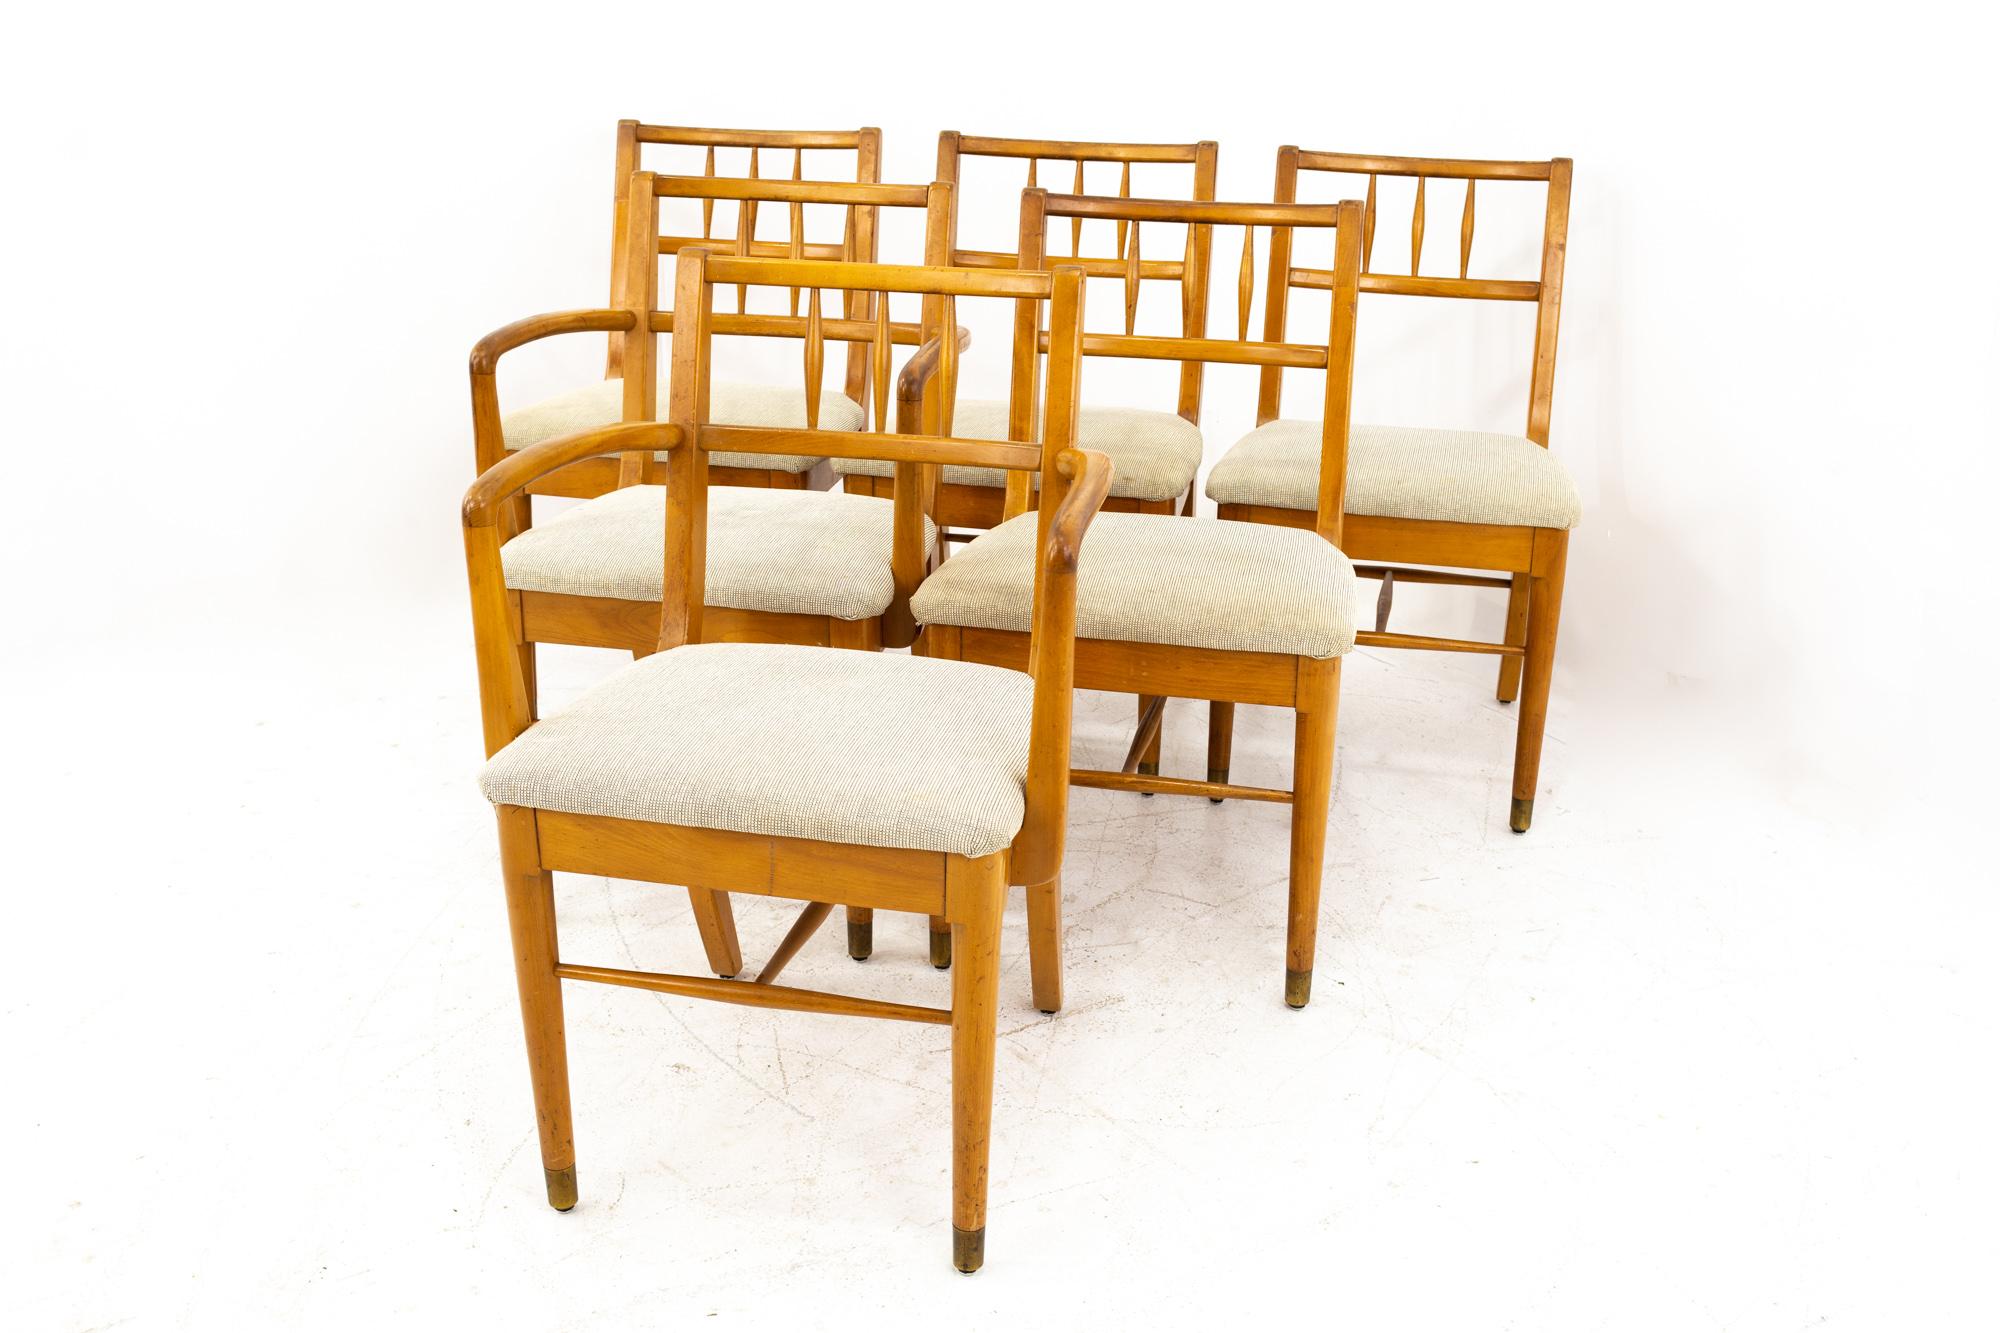 Mid-Century Modern Milo Baughman for Drexel Todays Living Midcentury Blonde Dining Chairs, Set of 6